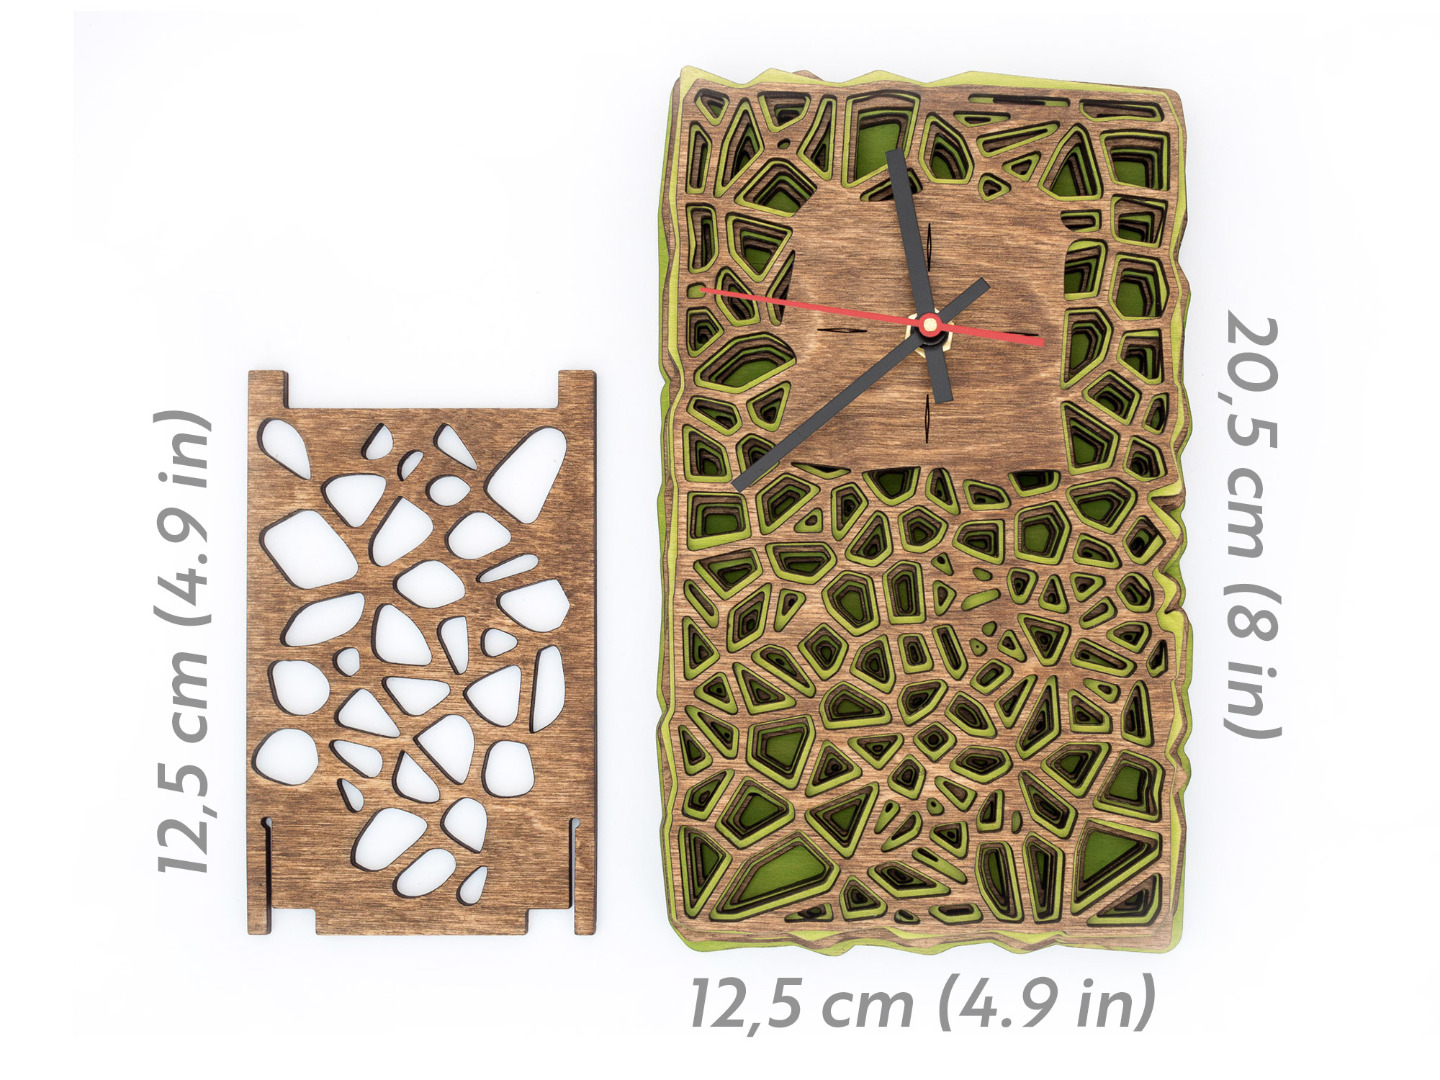 Wooden Clock for Desktop or Wall - Layered Organic Two Tone Design Walnut Brown and May Green 12